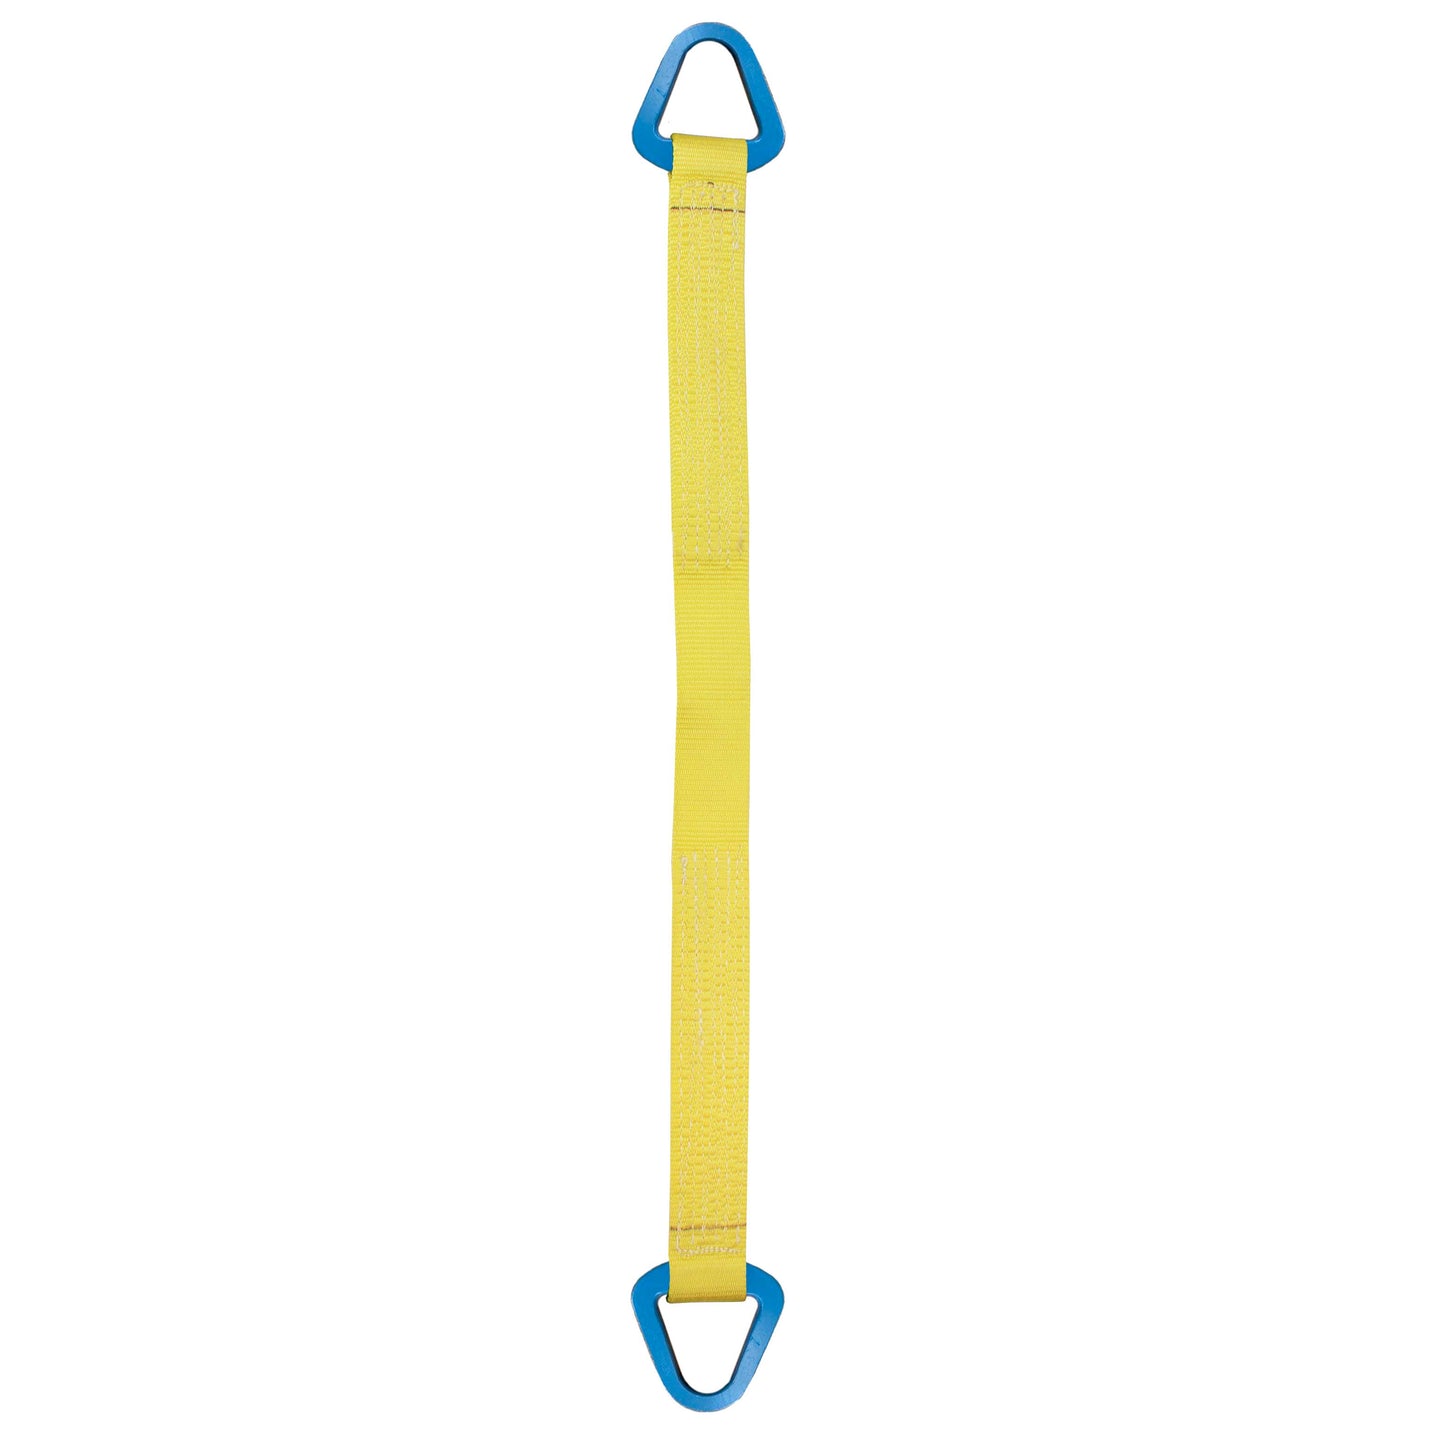 Nylon Lifting Sling Triangle 8 inch x 16 foot 1ply image 1 of 2